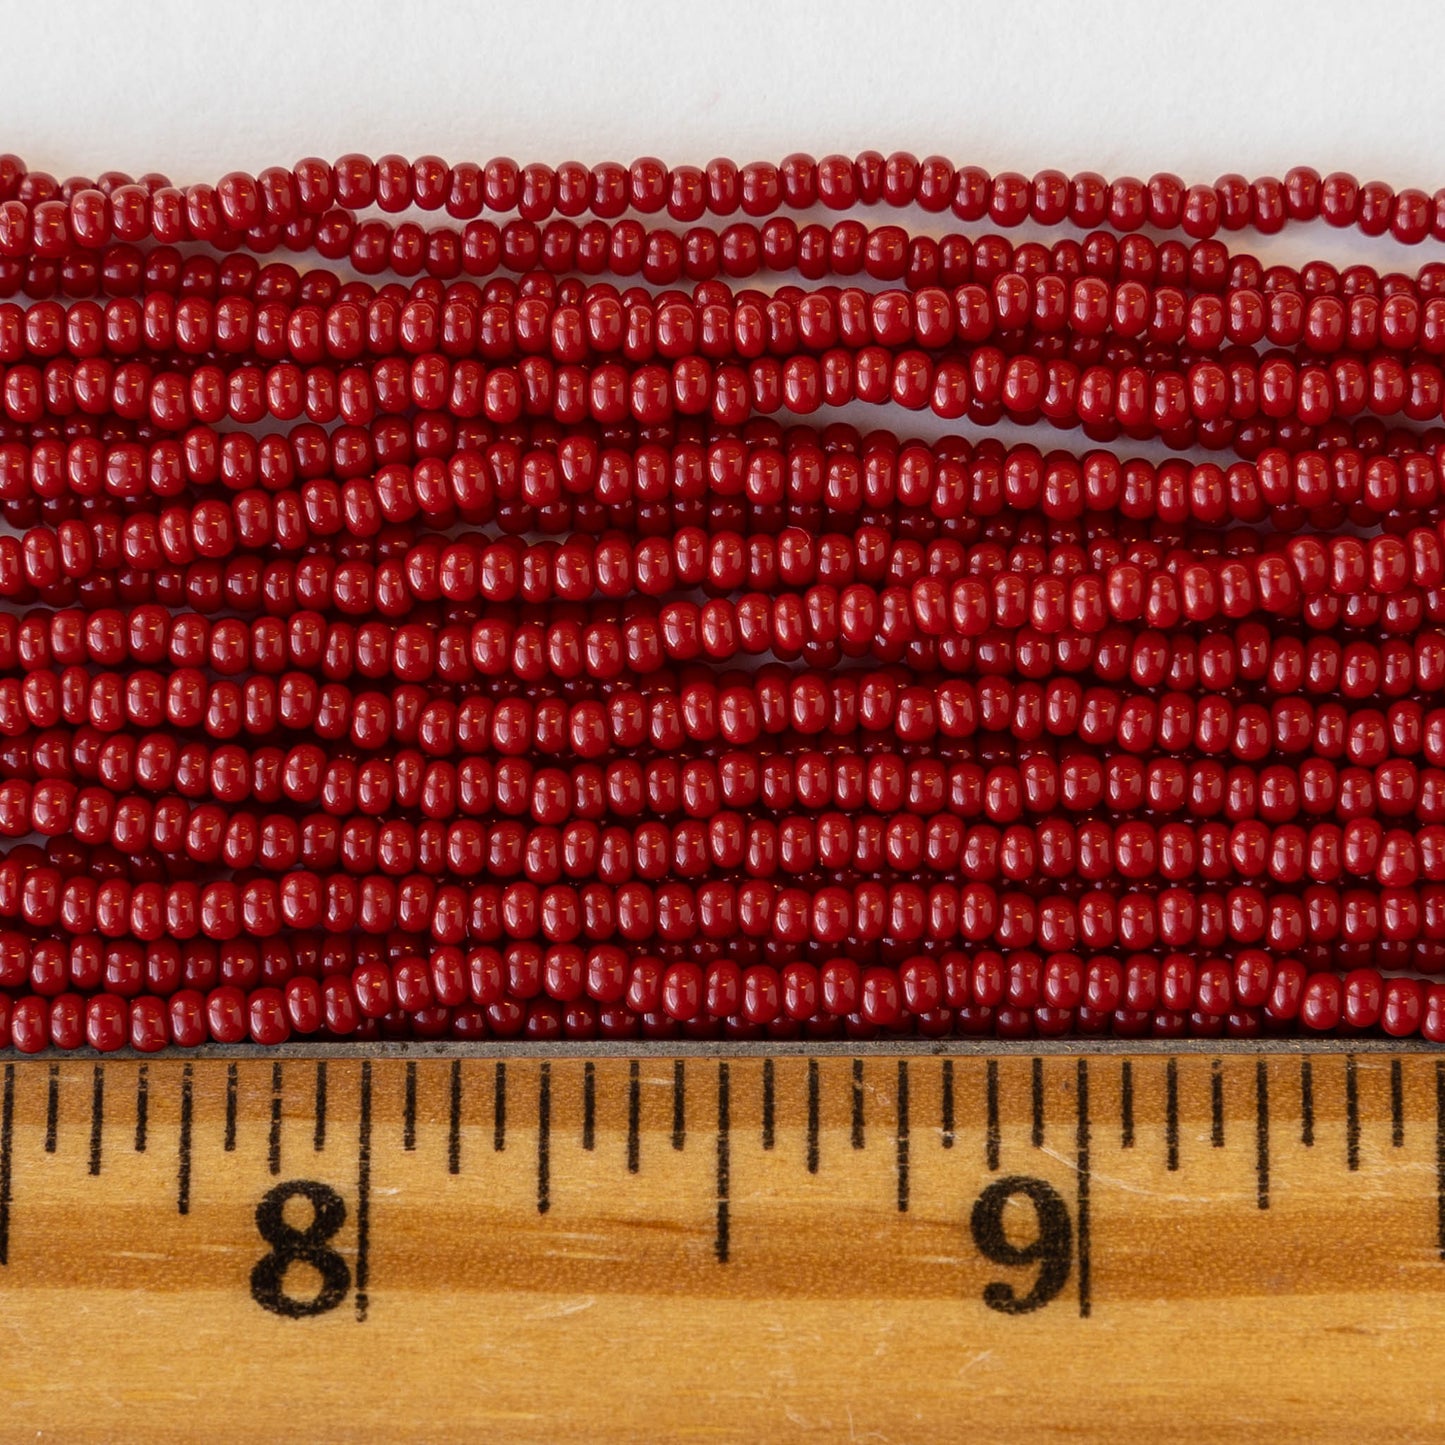 Size 11/0 Seed Beads - Opaque Maroon - Choose Amount